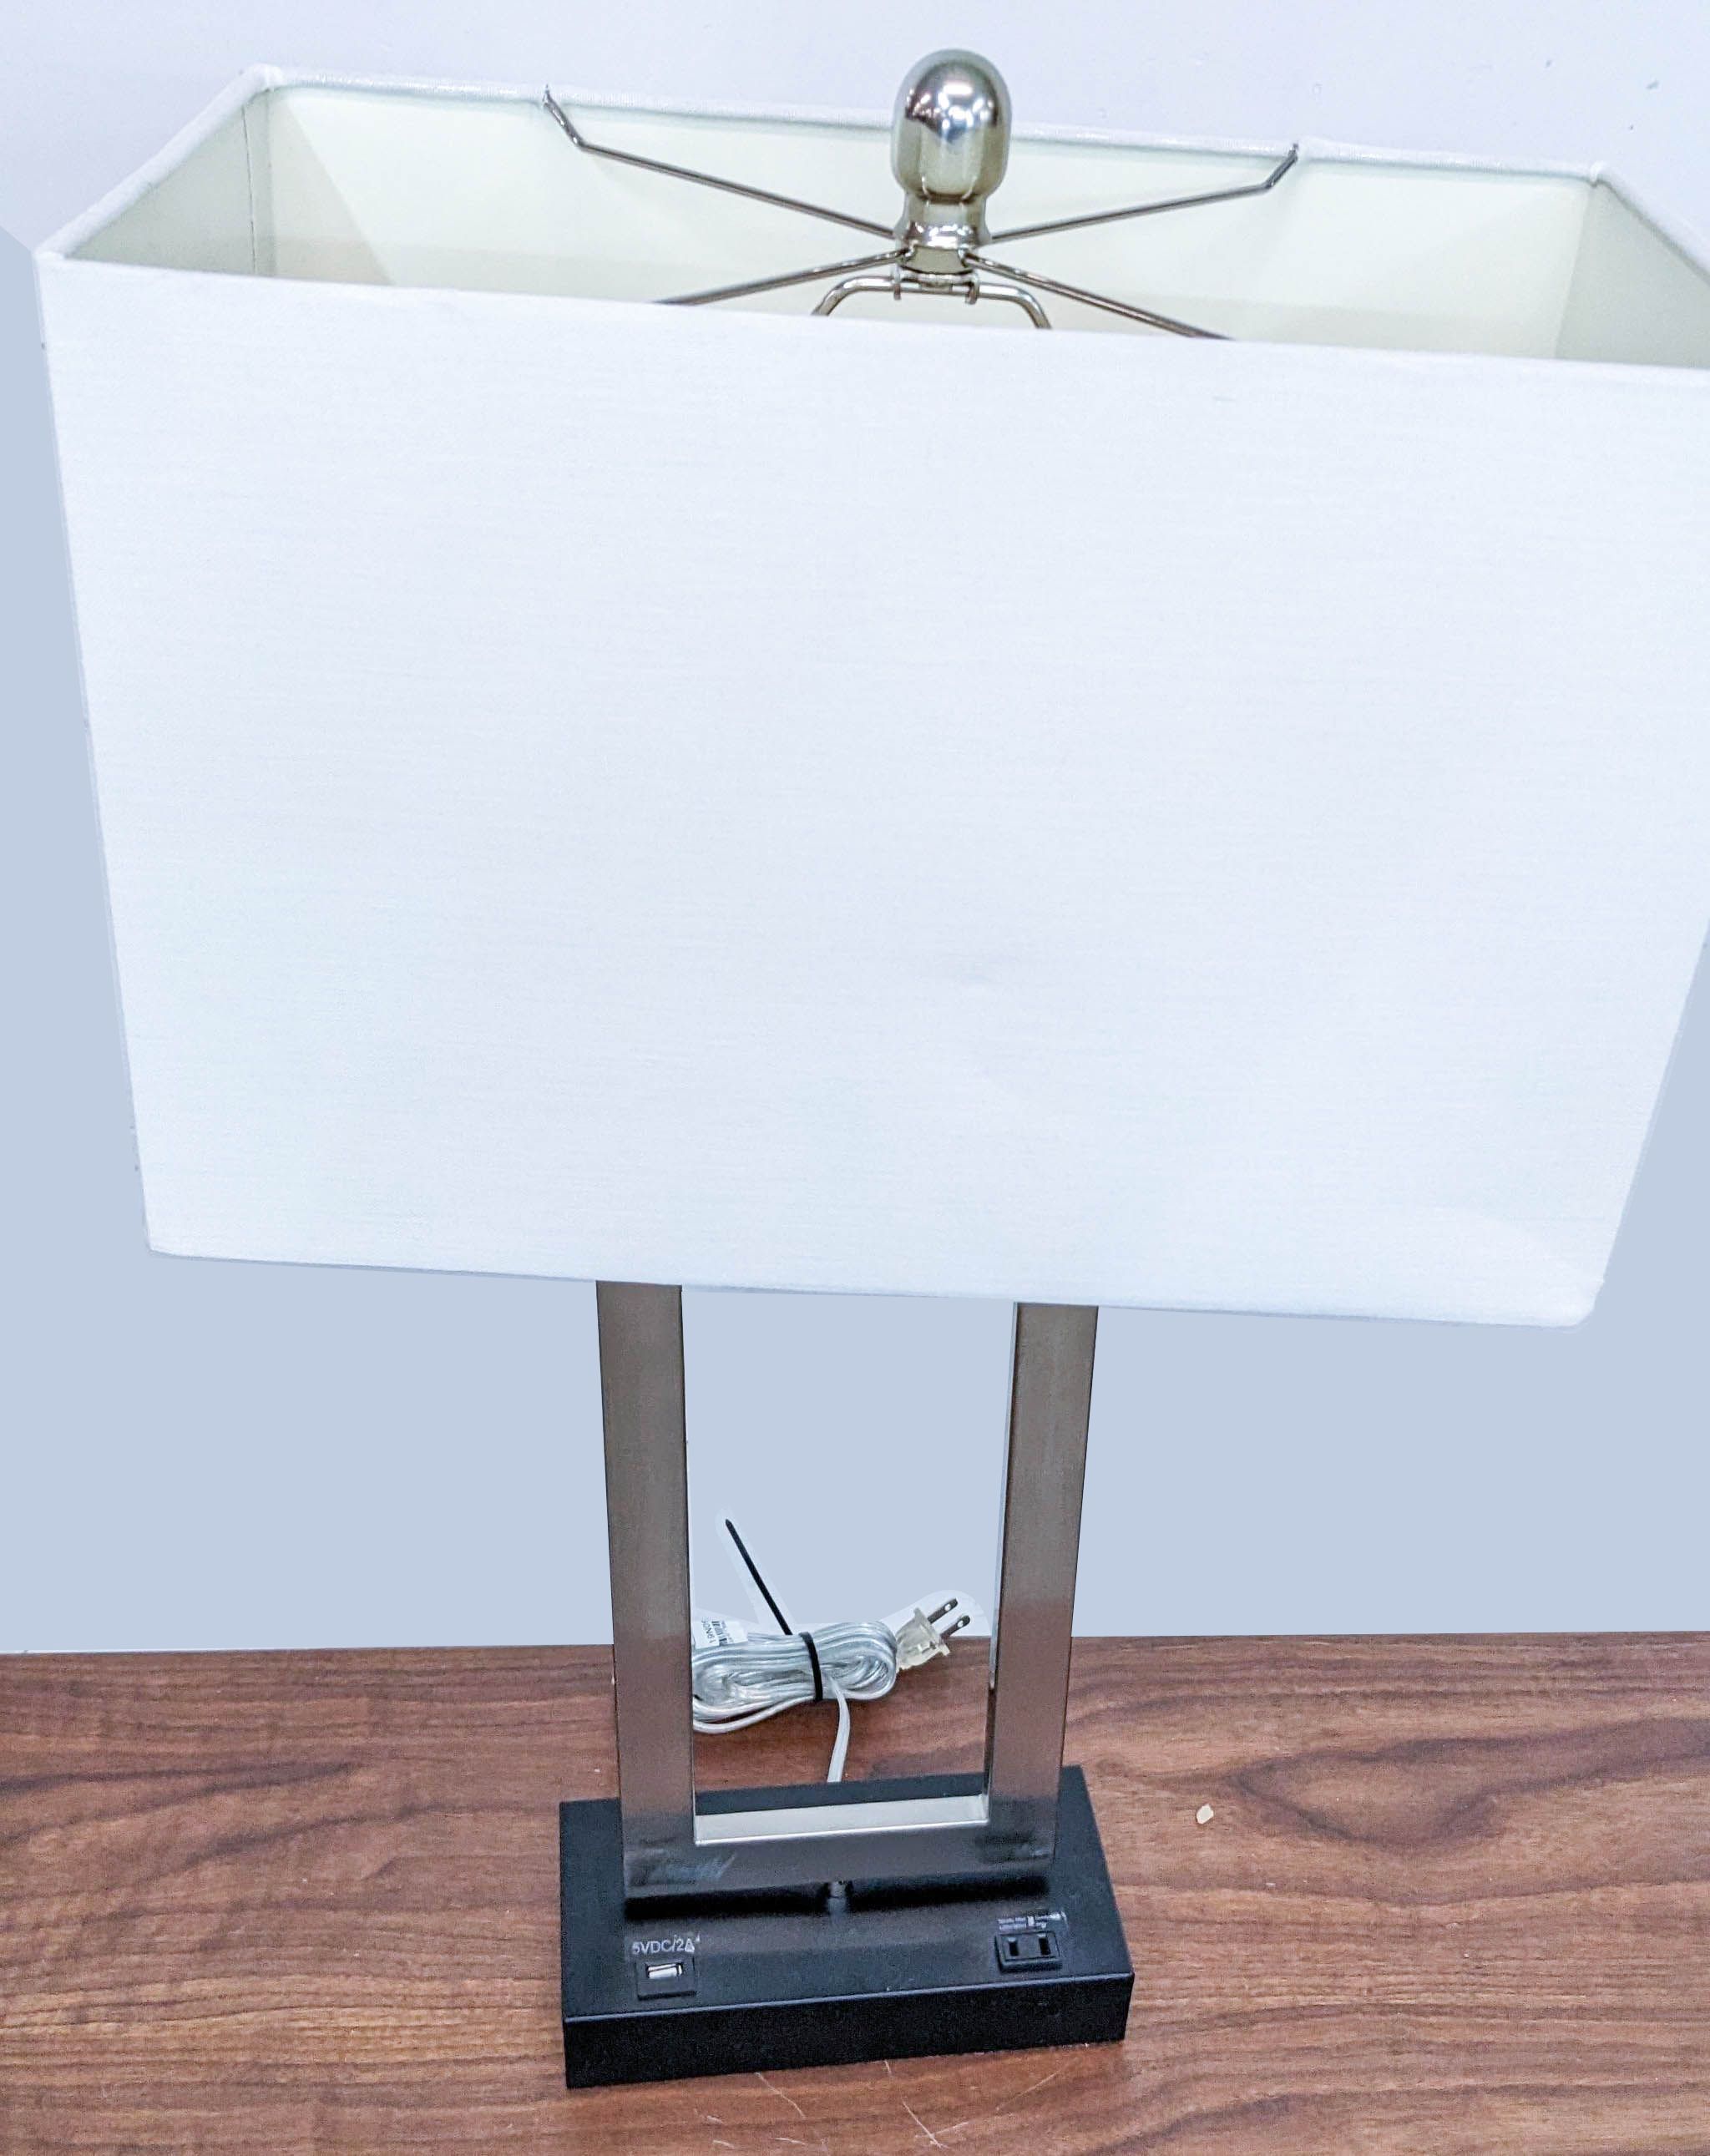 Reperch brand modern table lamp with a rectangular white shade and a metal frame on a wooden desk.